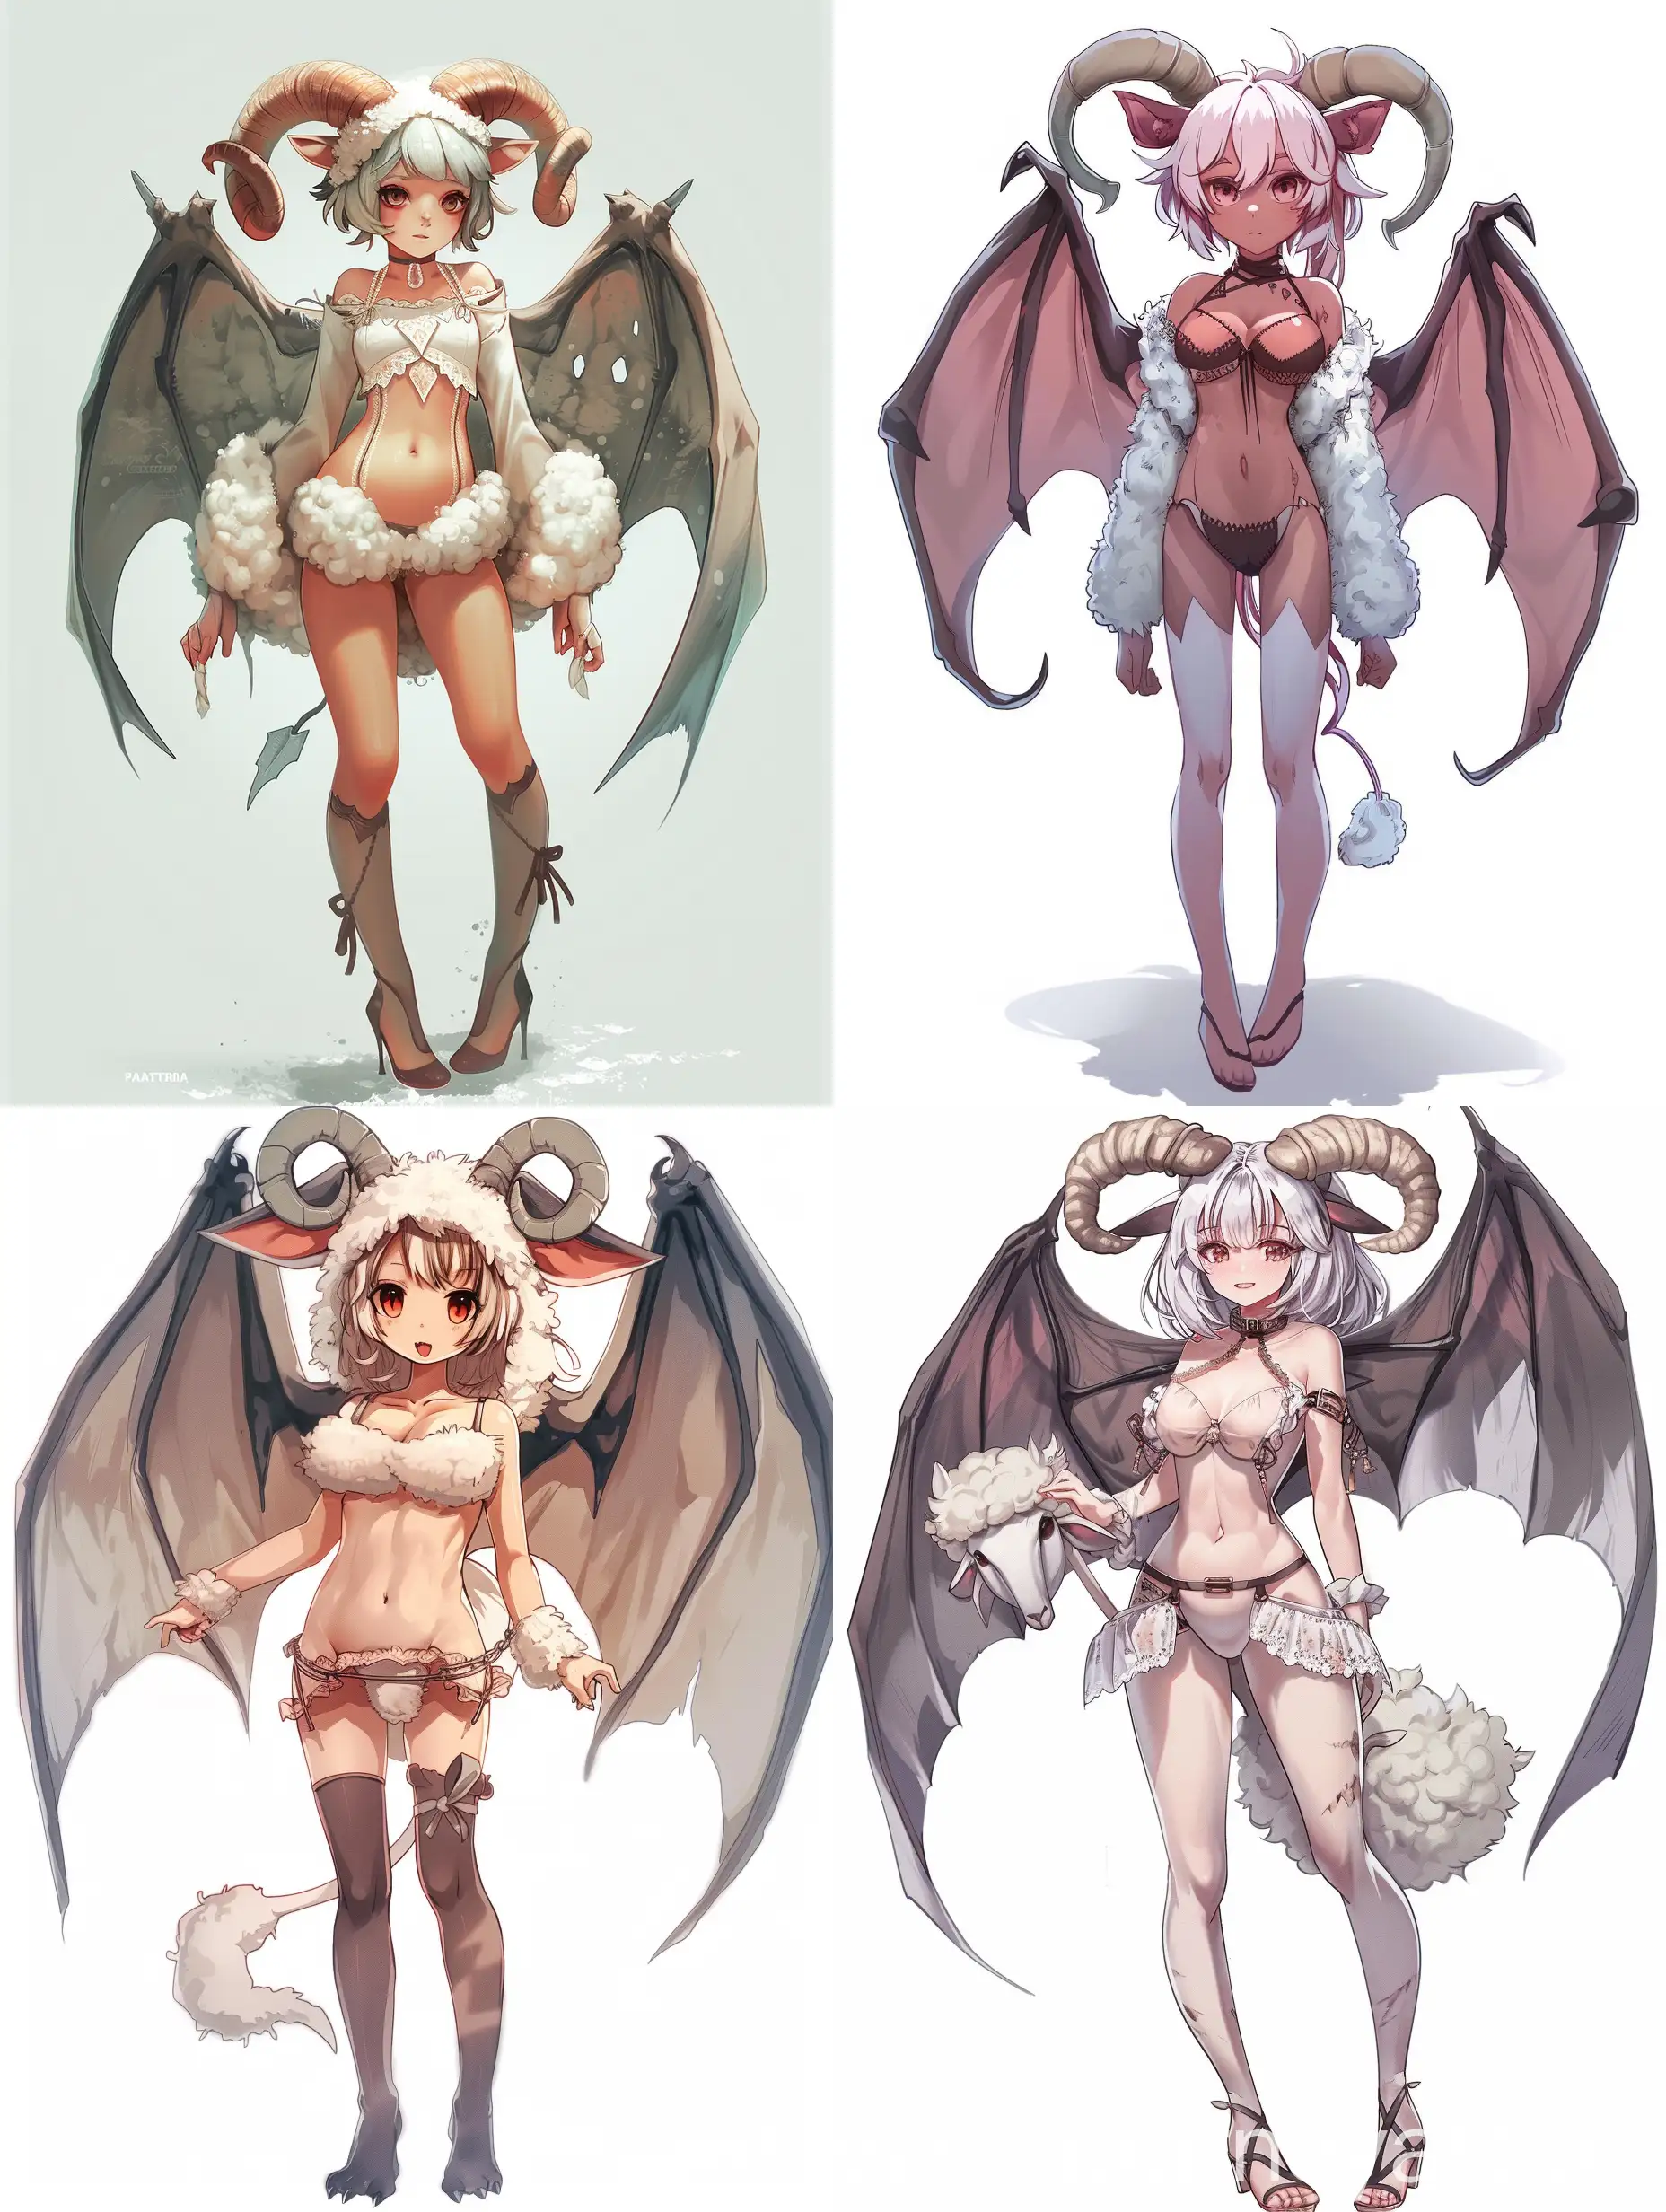 Enchanting-Anime-Girl-with-Sheep-Horns-and-Bat-Wings